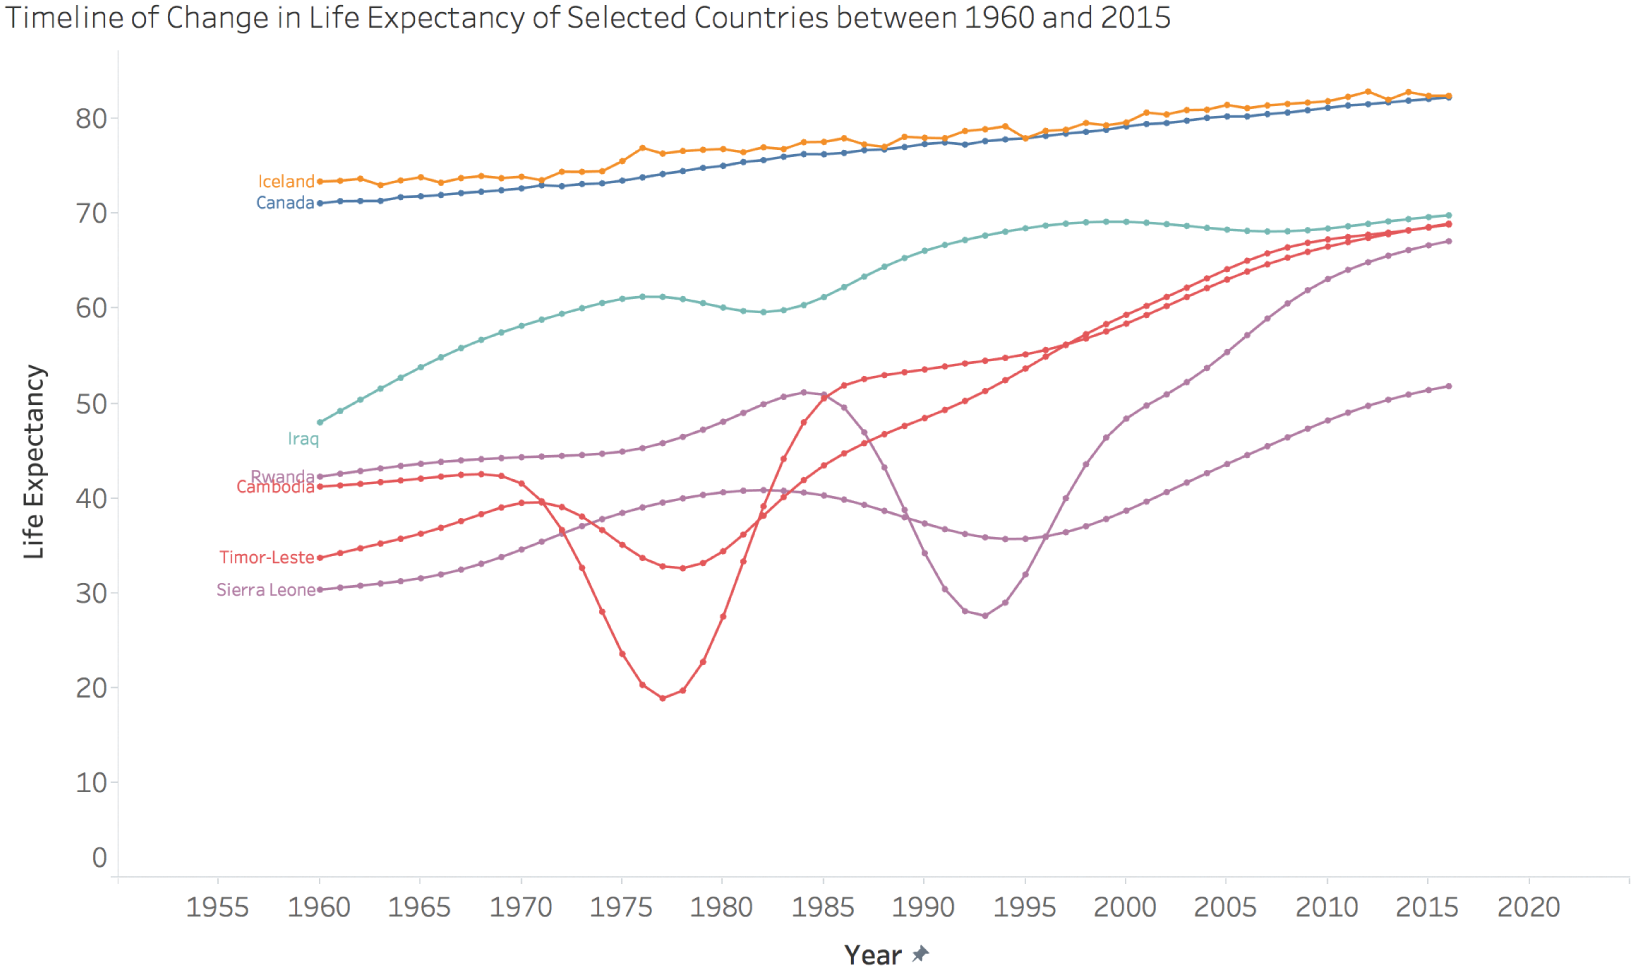 Graph depicting the timeline of change in life expectancy of selected countries from 1960 to 2015.